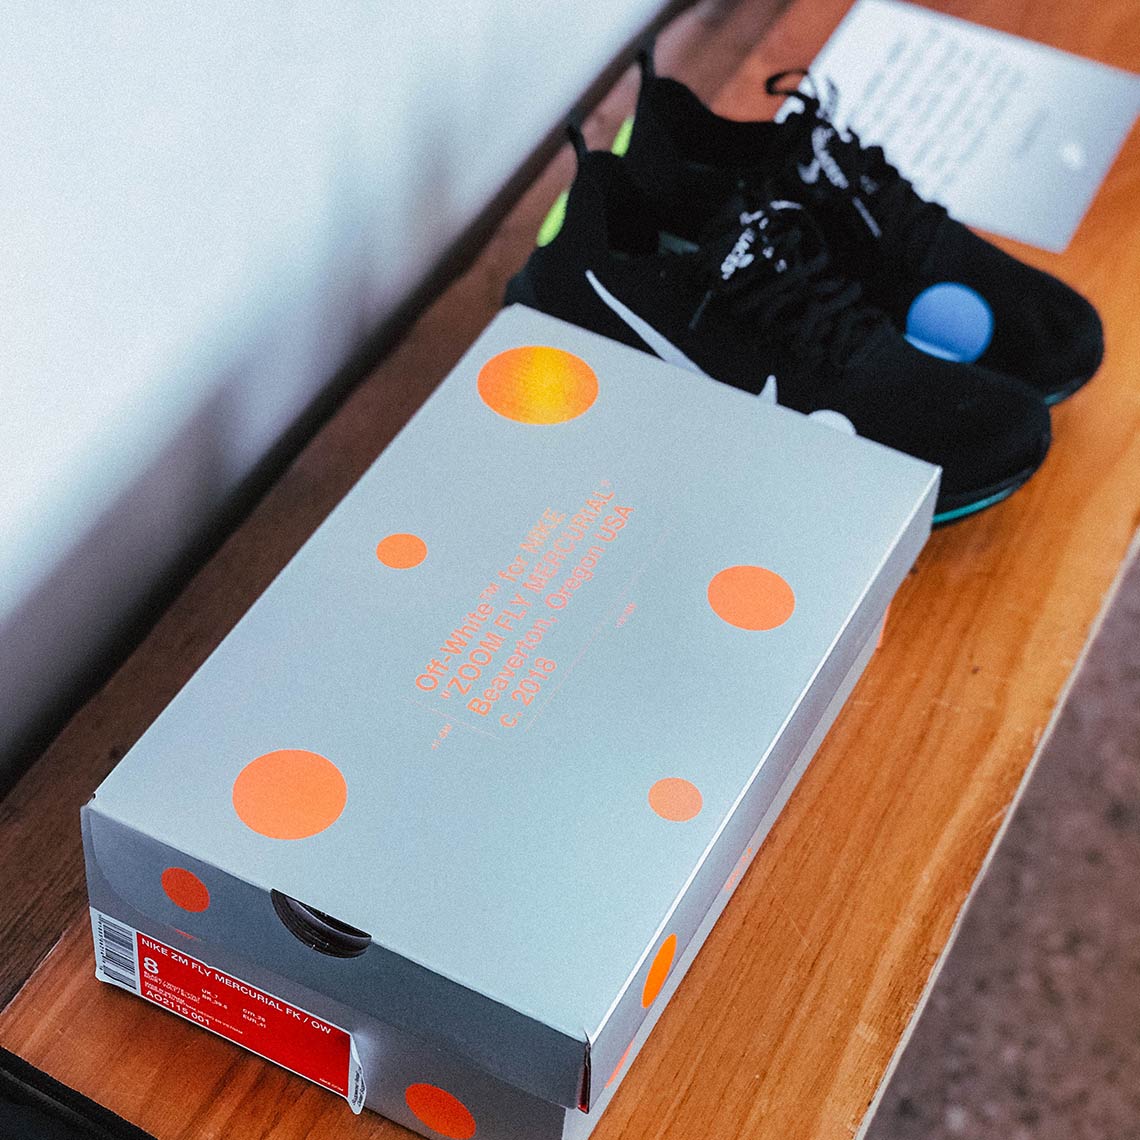 OFF WHITE x Nike Zoom Fly Mercurial Flyknit - Tag